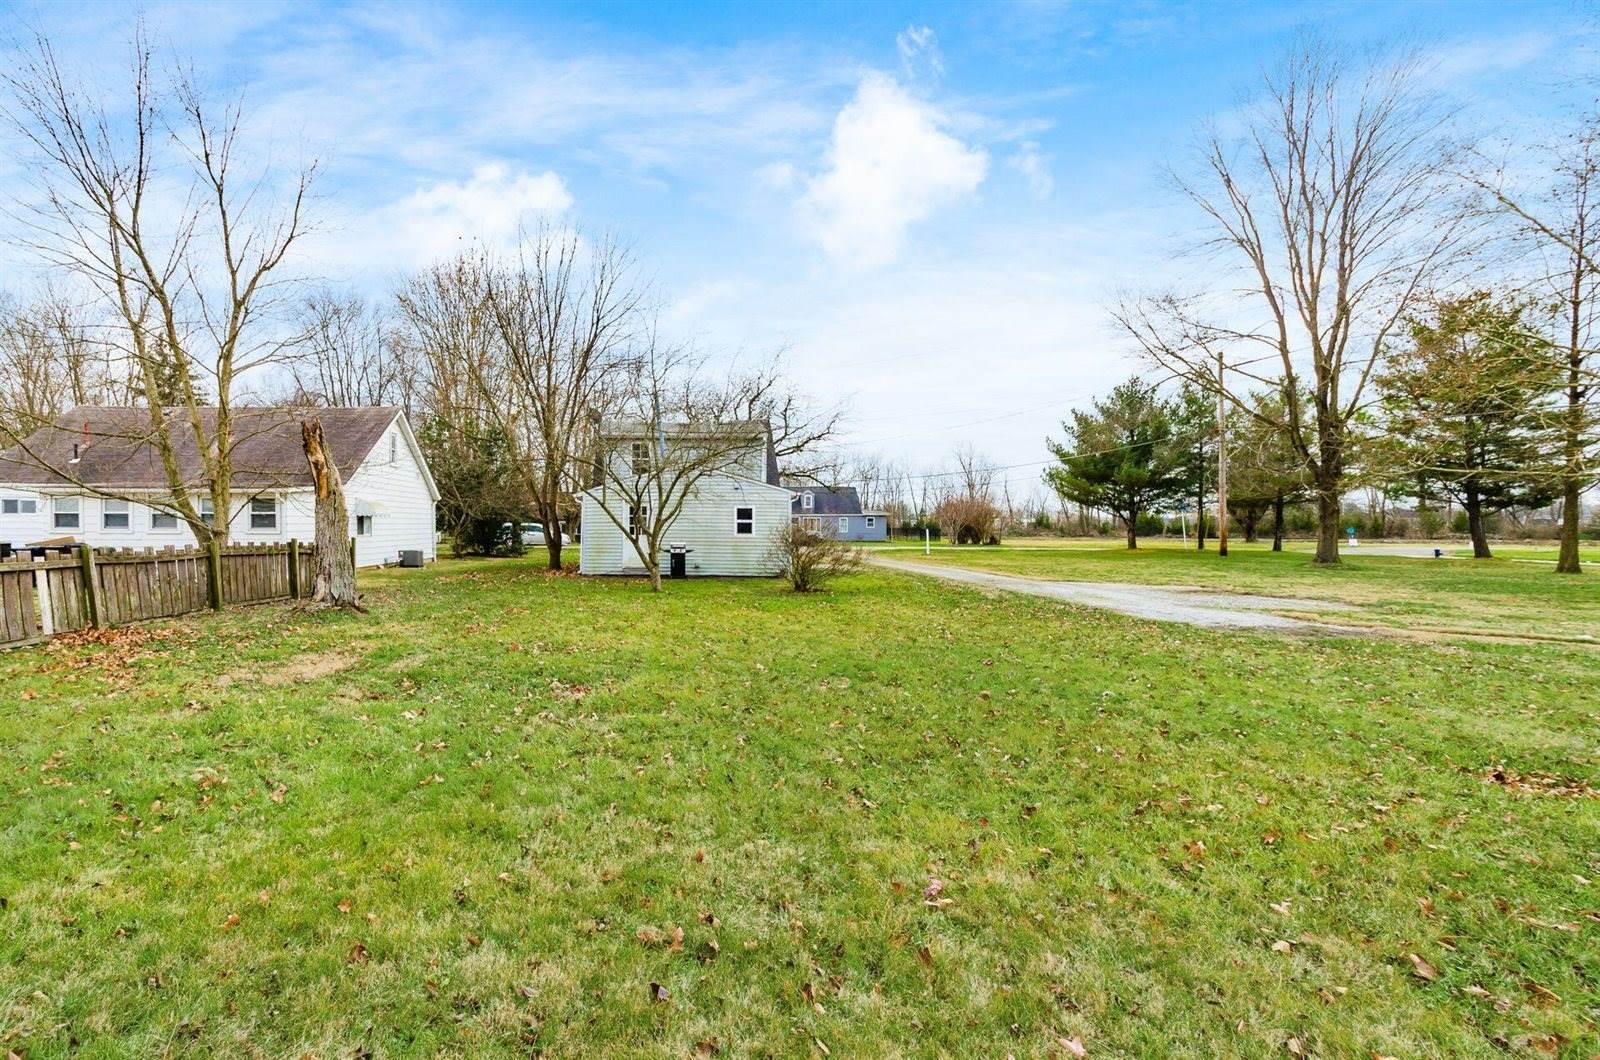 4892 Jeannette Road, Hilliard, OH 43026